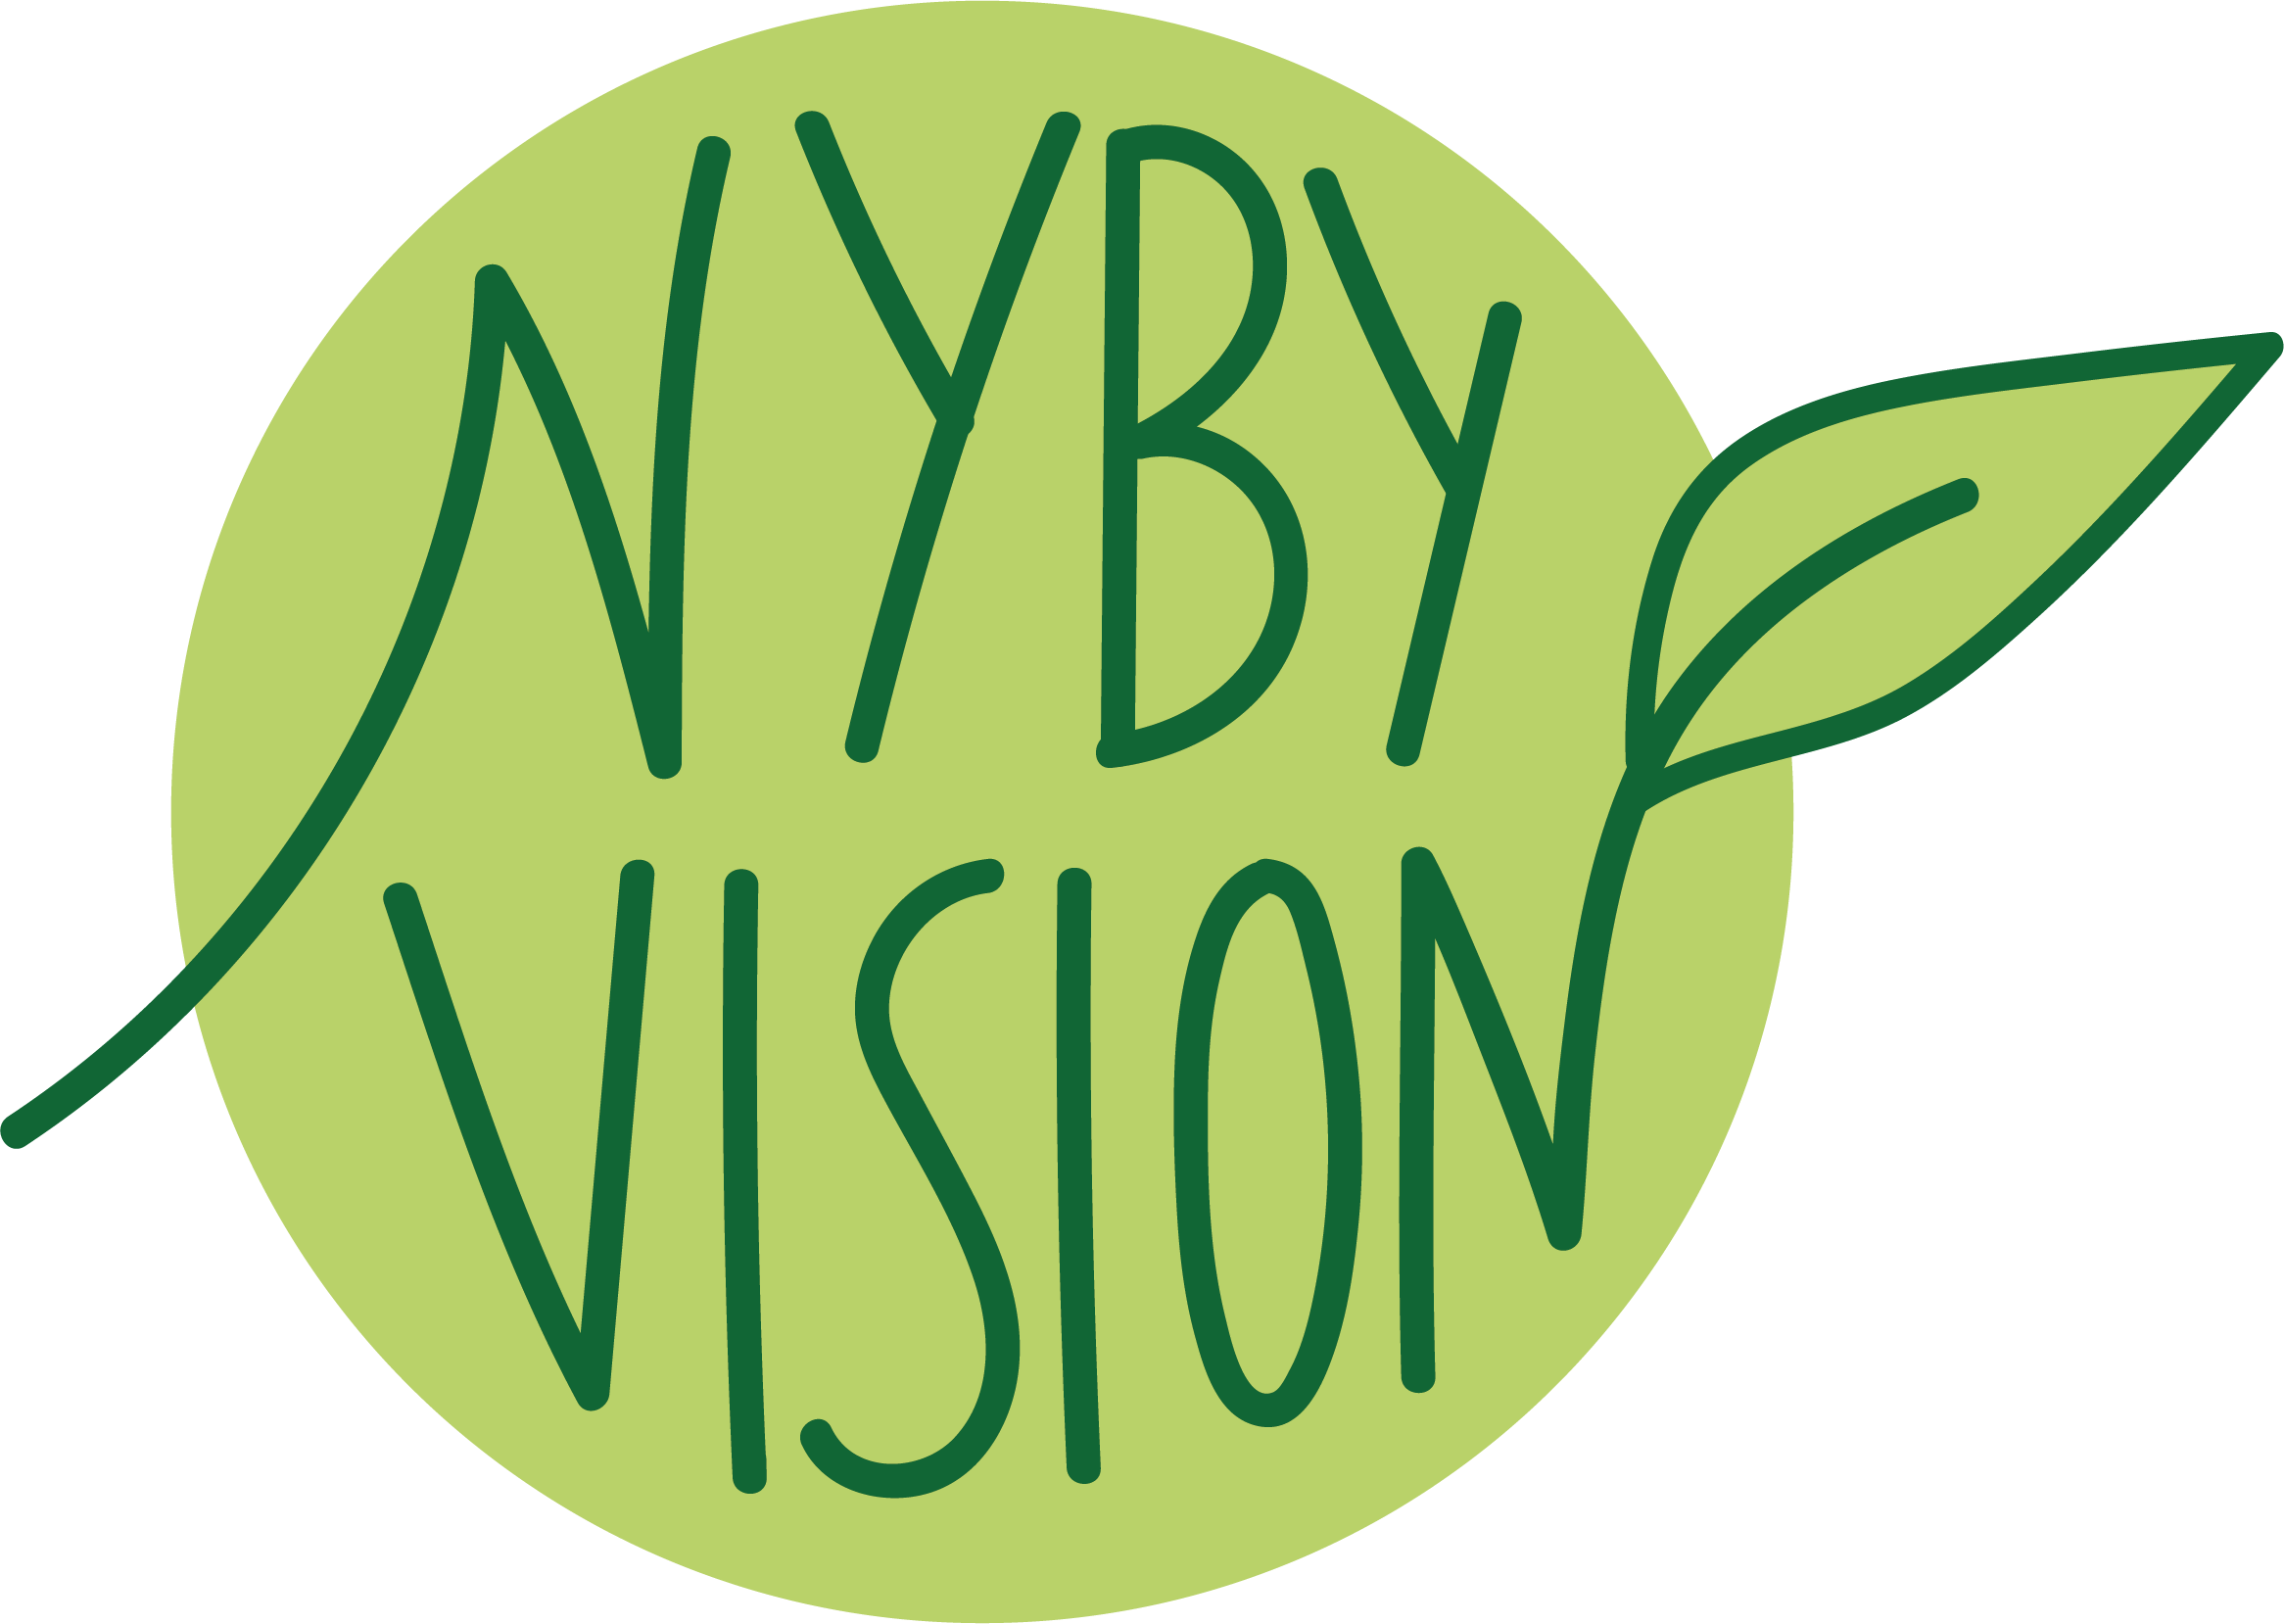 NybyVision